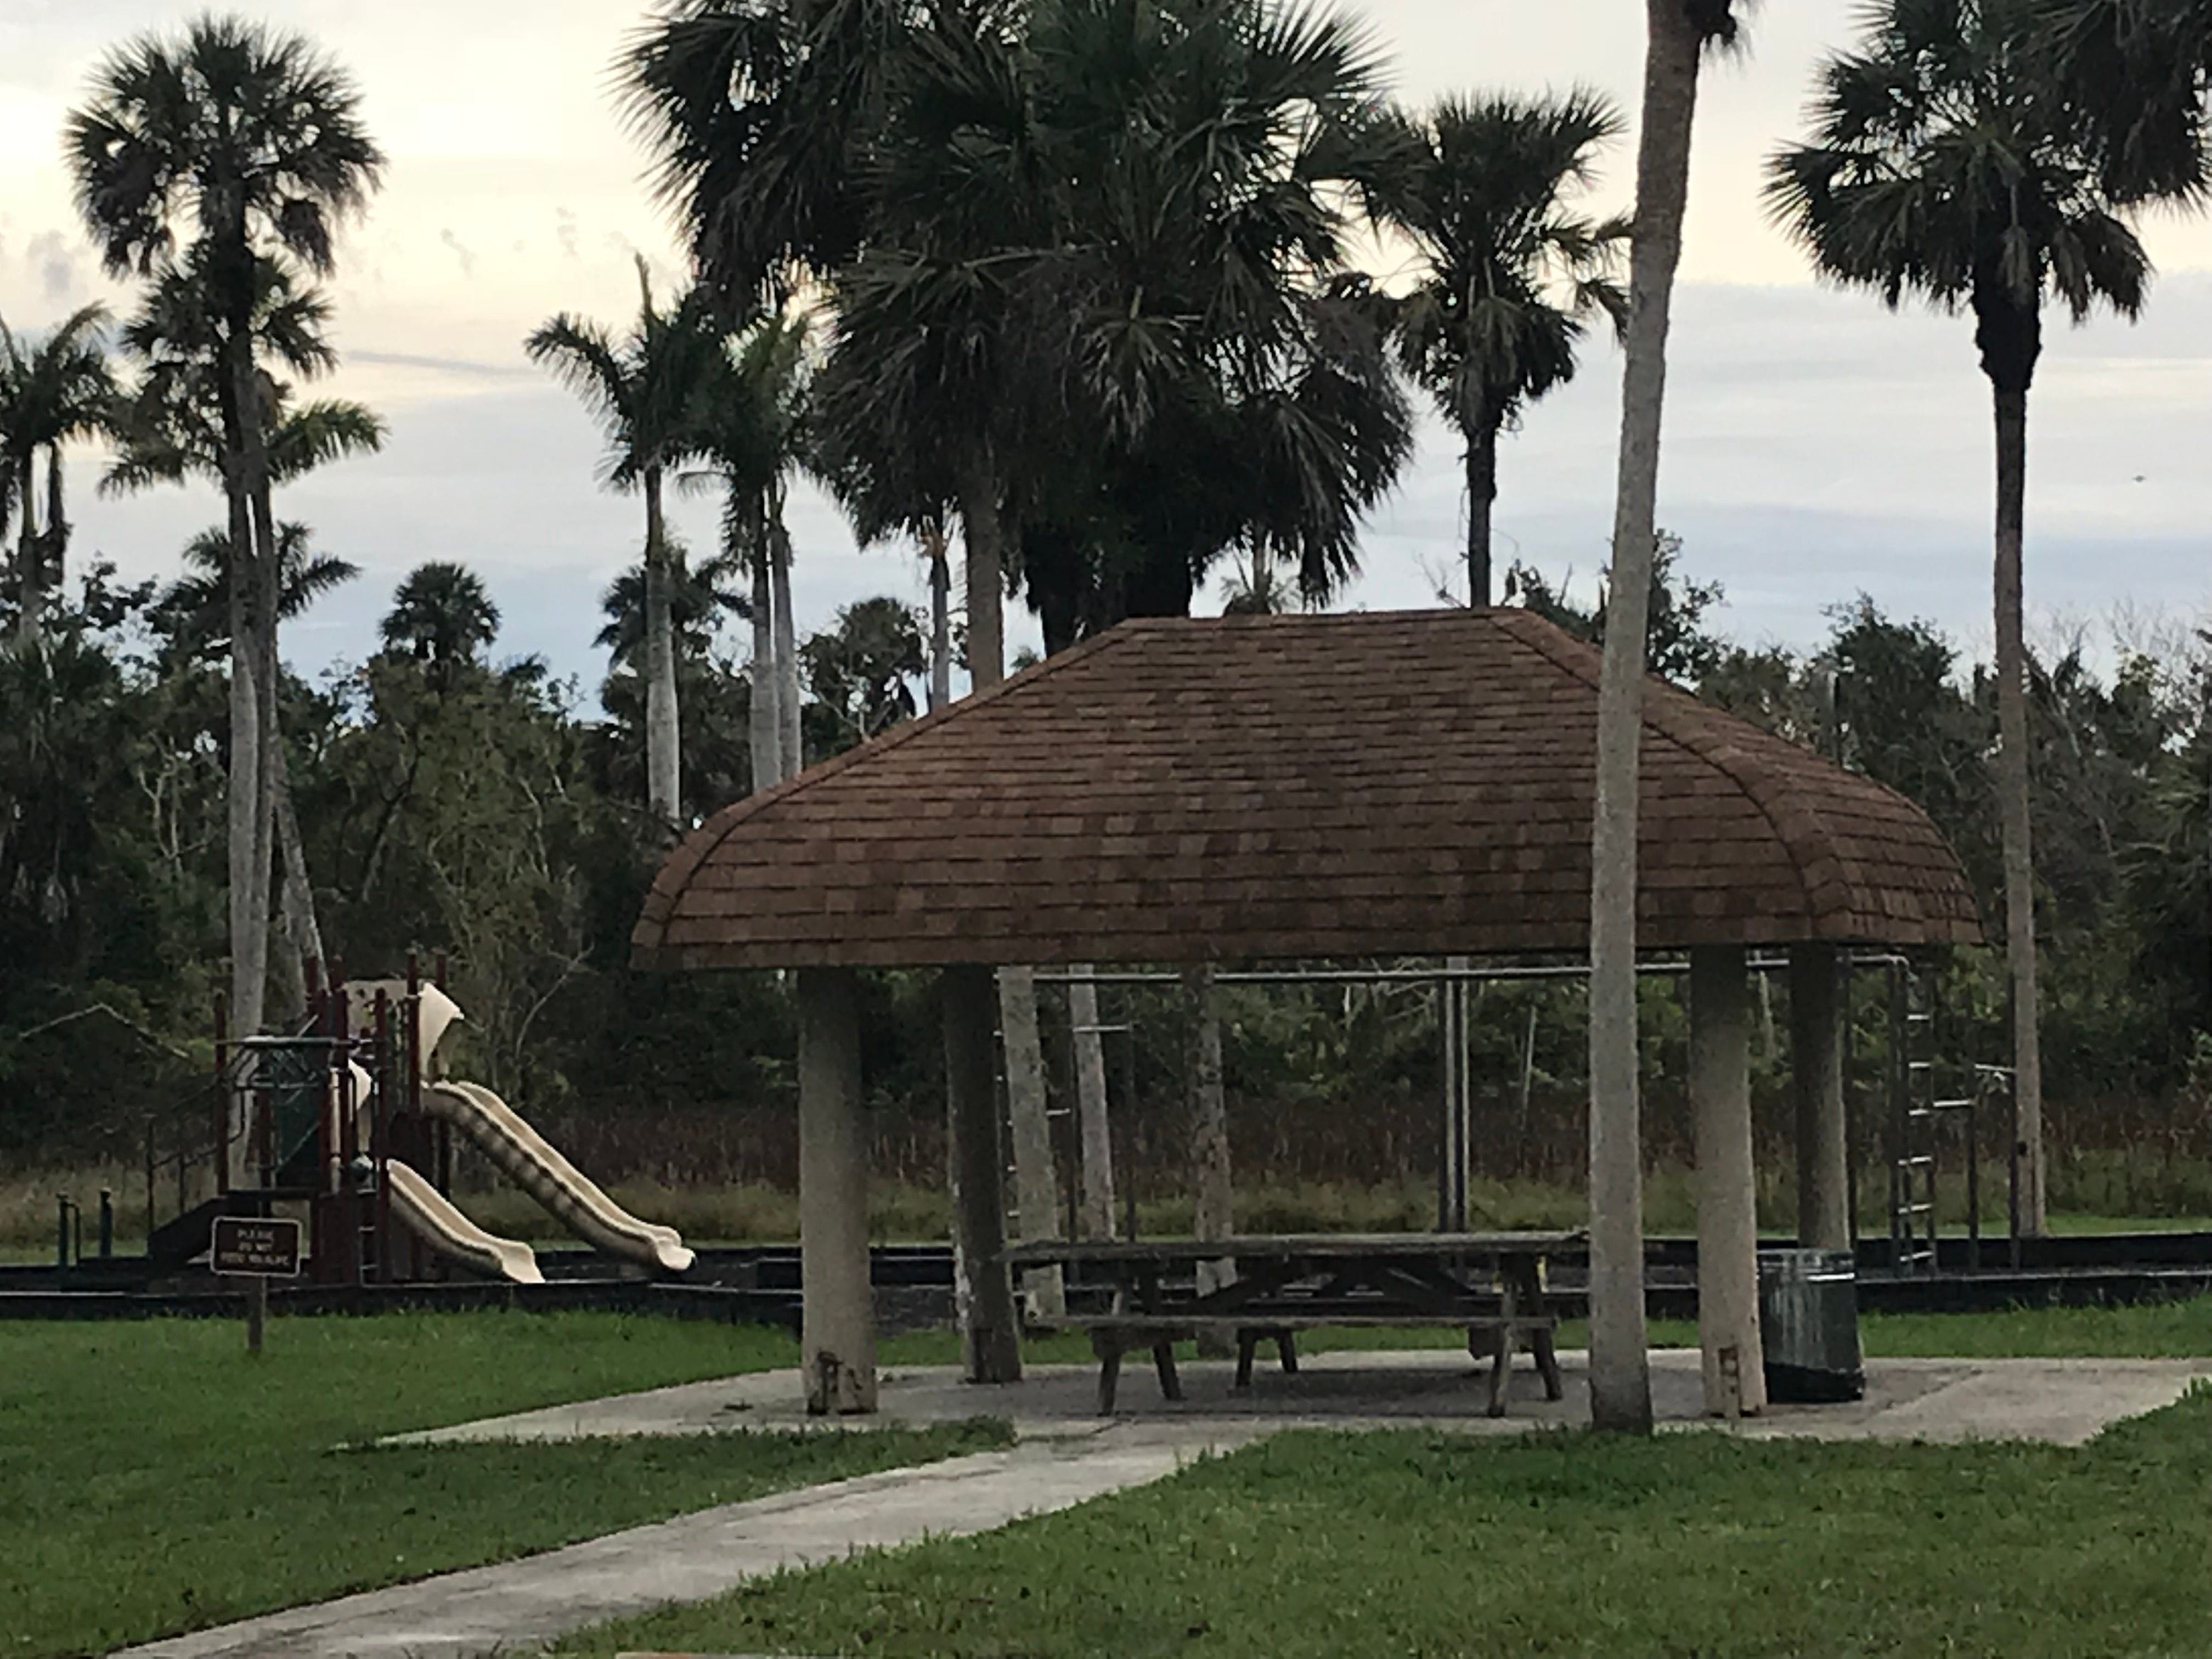 Playground and picnic area adjacent to boat dock area, for both campers and Day Use visitors